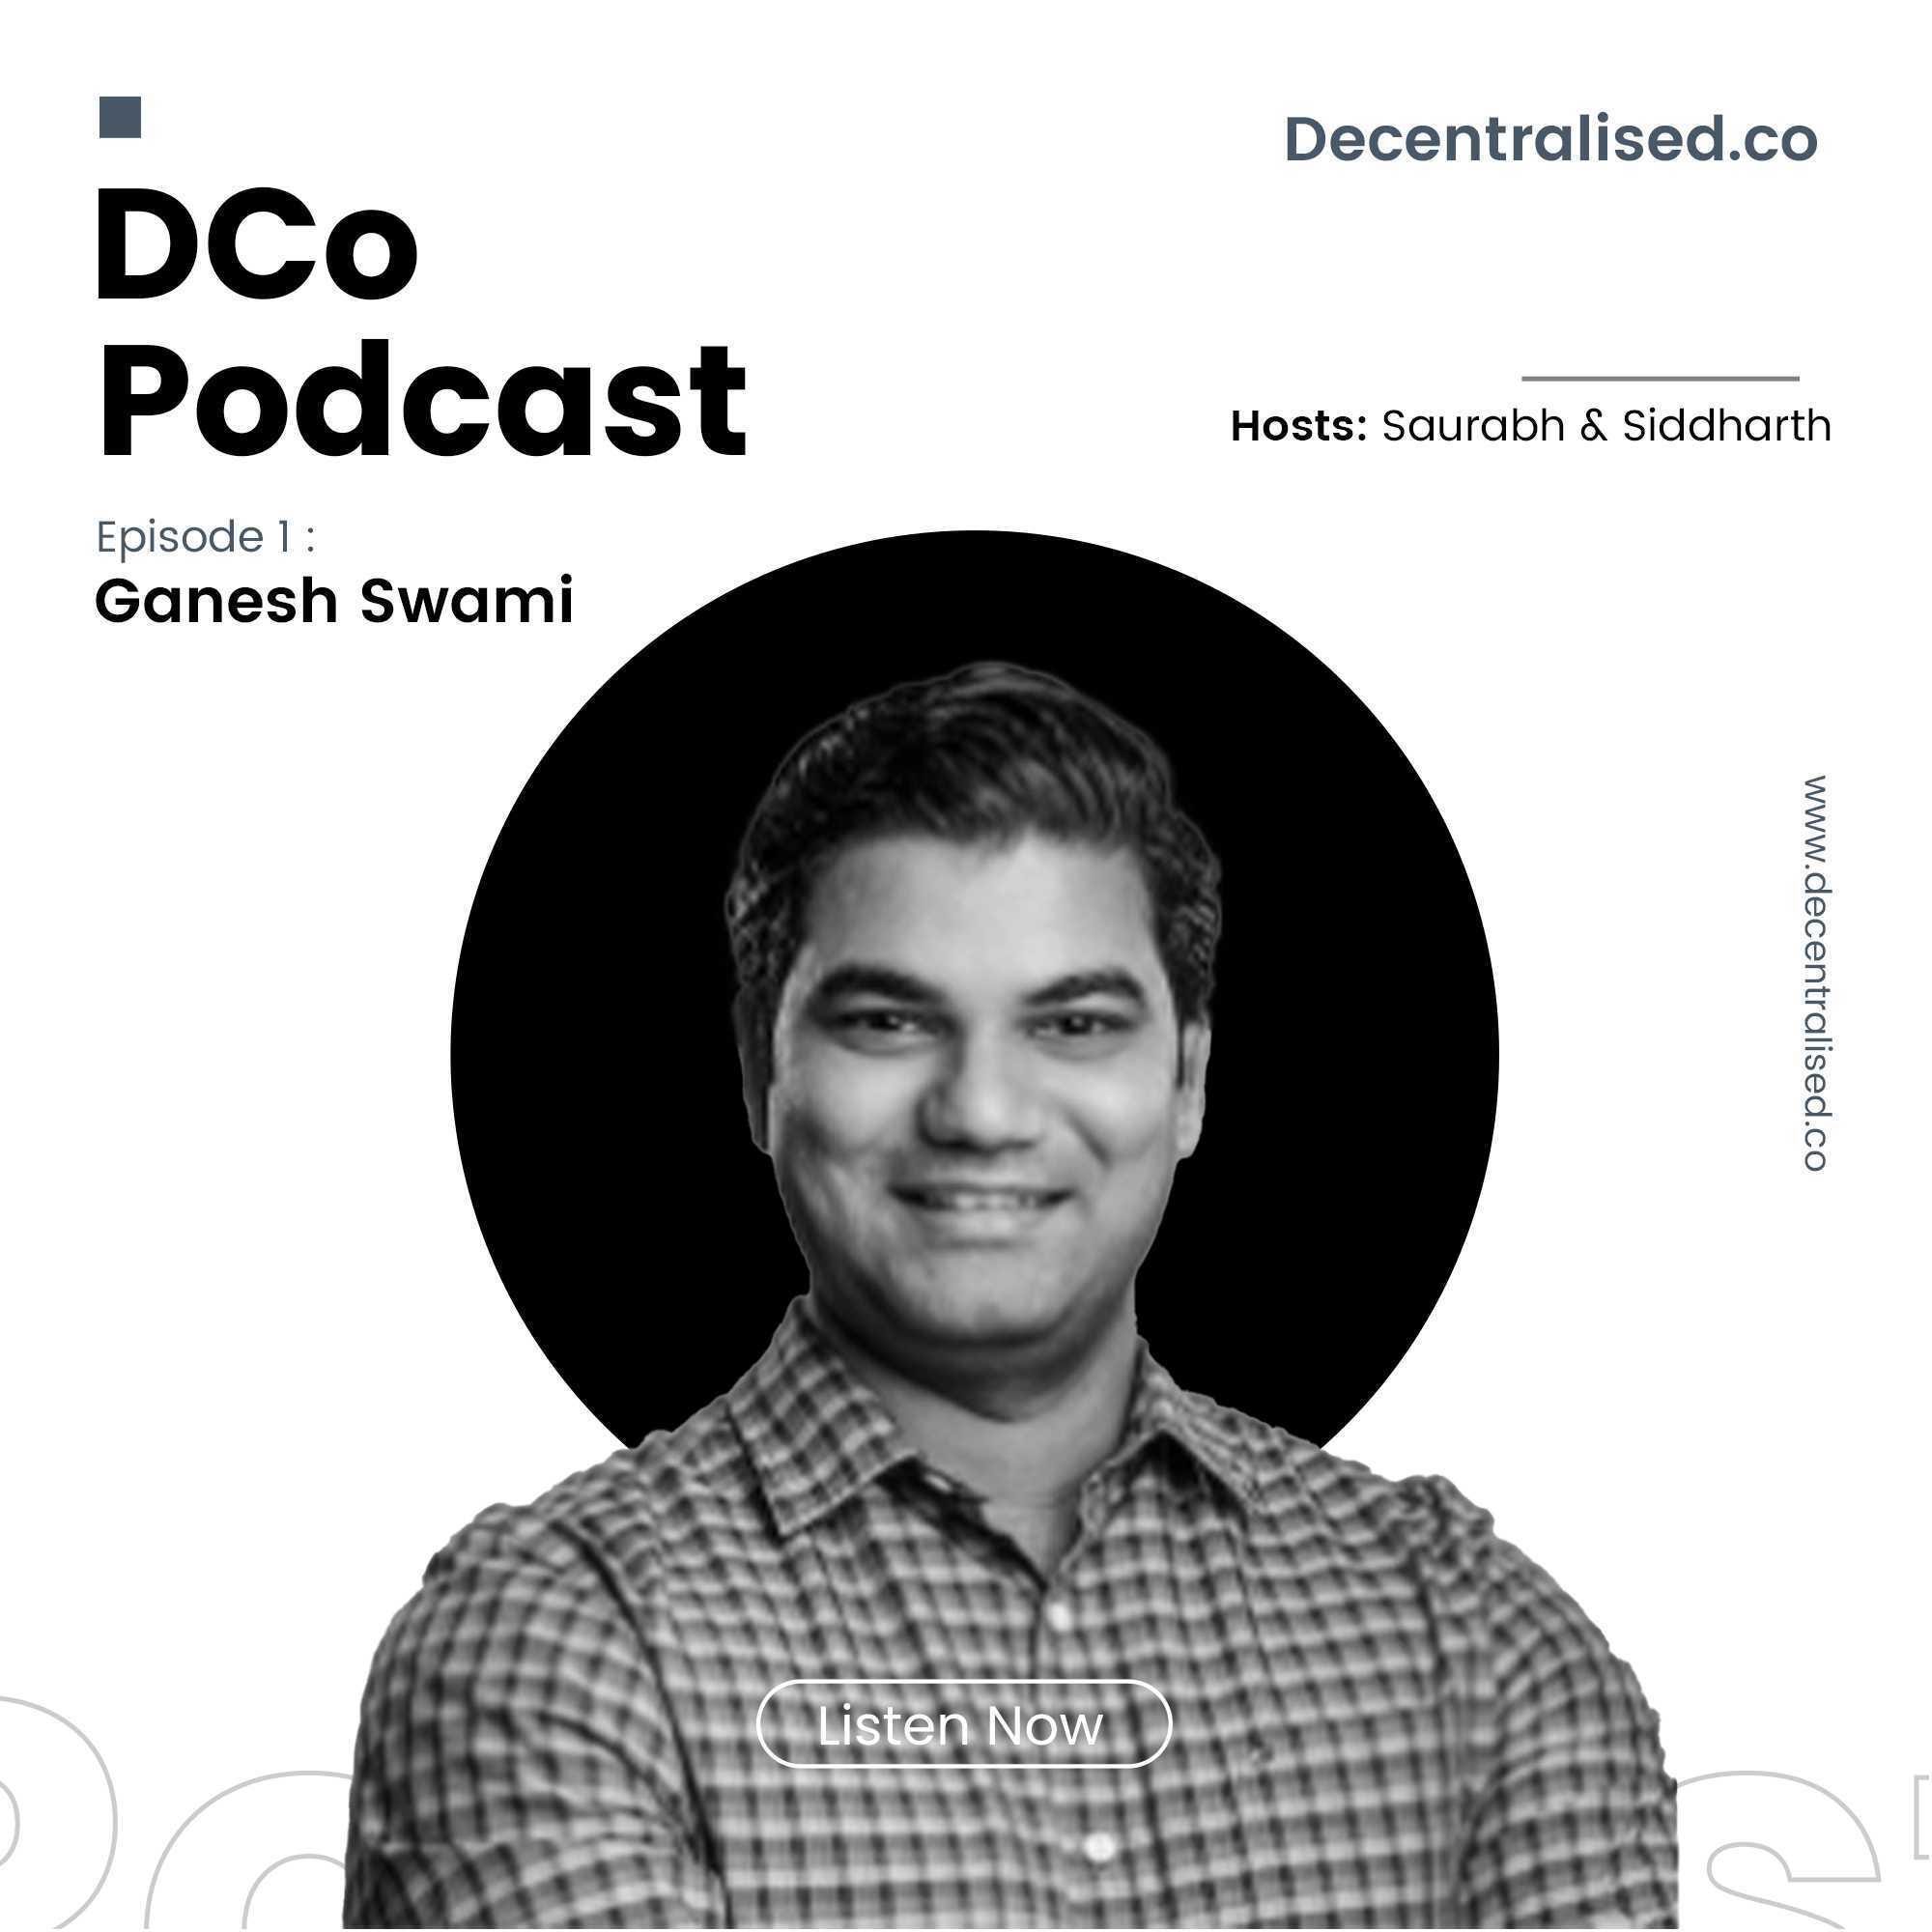 A New Medium - Decentralised.co's Podcast